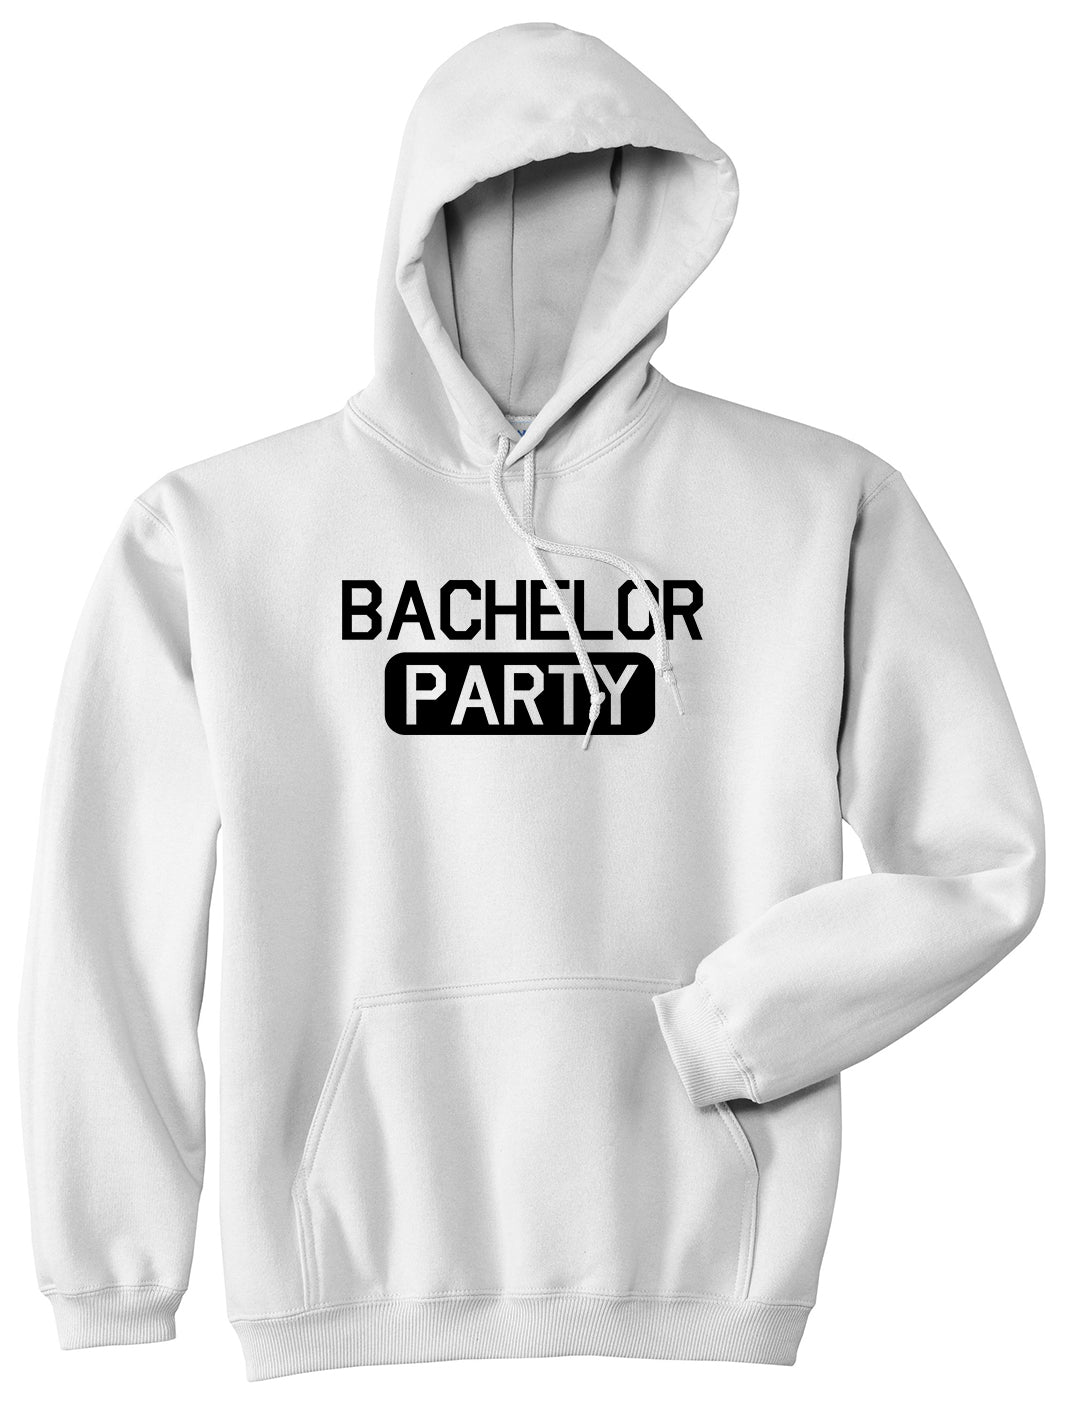 Bachelor Party White Pullover Hoodie by Kings Of NY